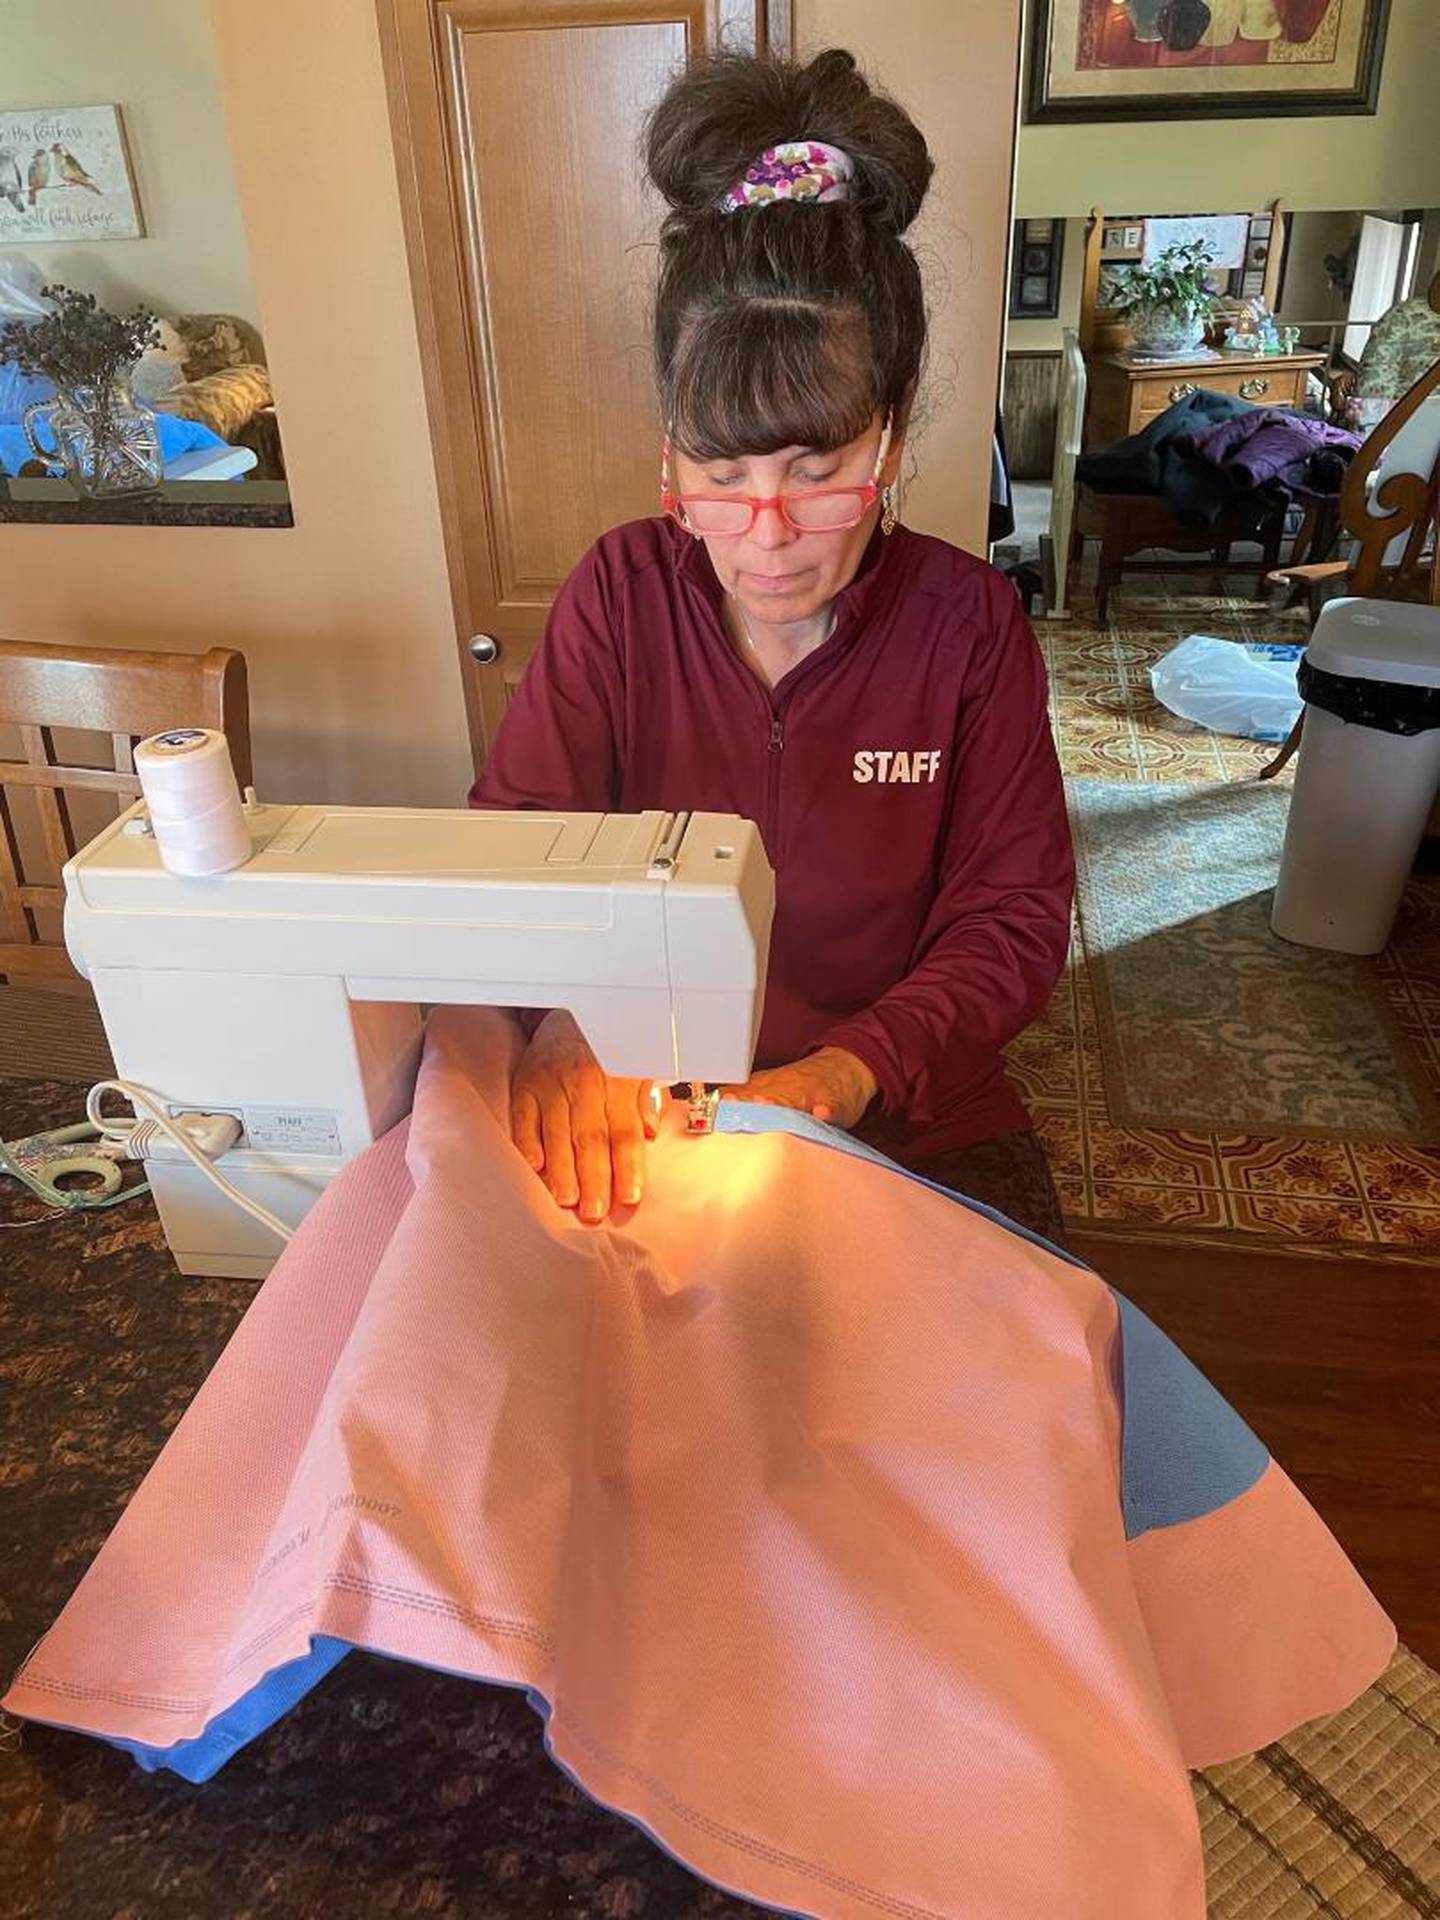 On Saturday, April 9, 2022, a small group of friends gathered at Kimberly Creasey's home in Joliet to create waterproof sleeping bags out of expired surgical drapes. The sleeping bags were sent to Poland, where they will be distributed to people from Ukraine in need. Pictured Kimberly Creasey of Joliet as she attaches drape fabric to form a sleeping bag.